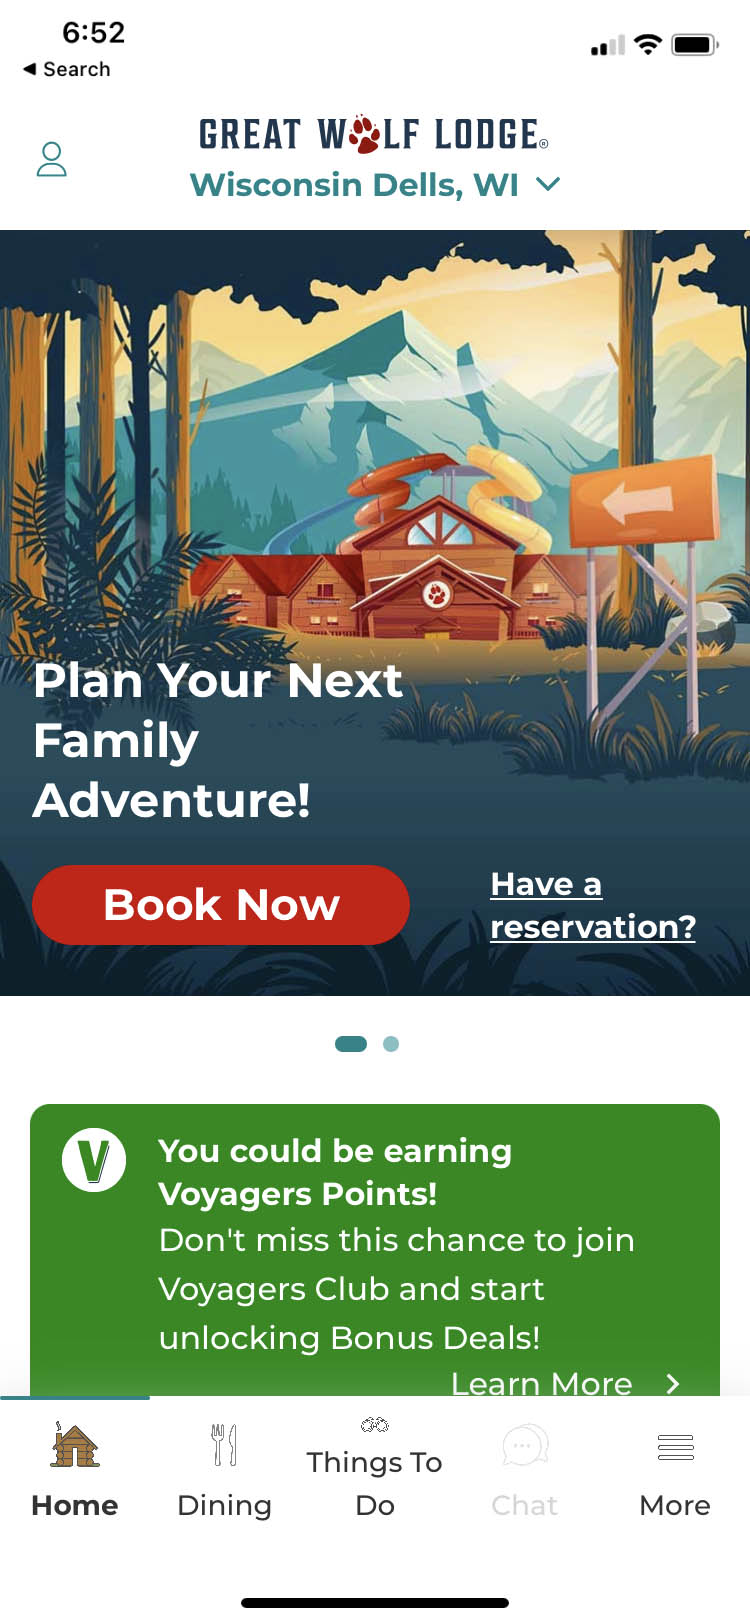 Mobile app opening screen for Great Wolf Lodge in Wisconsin Dells